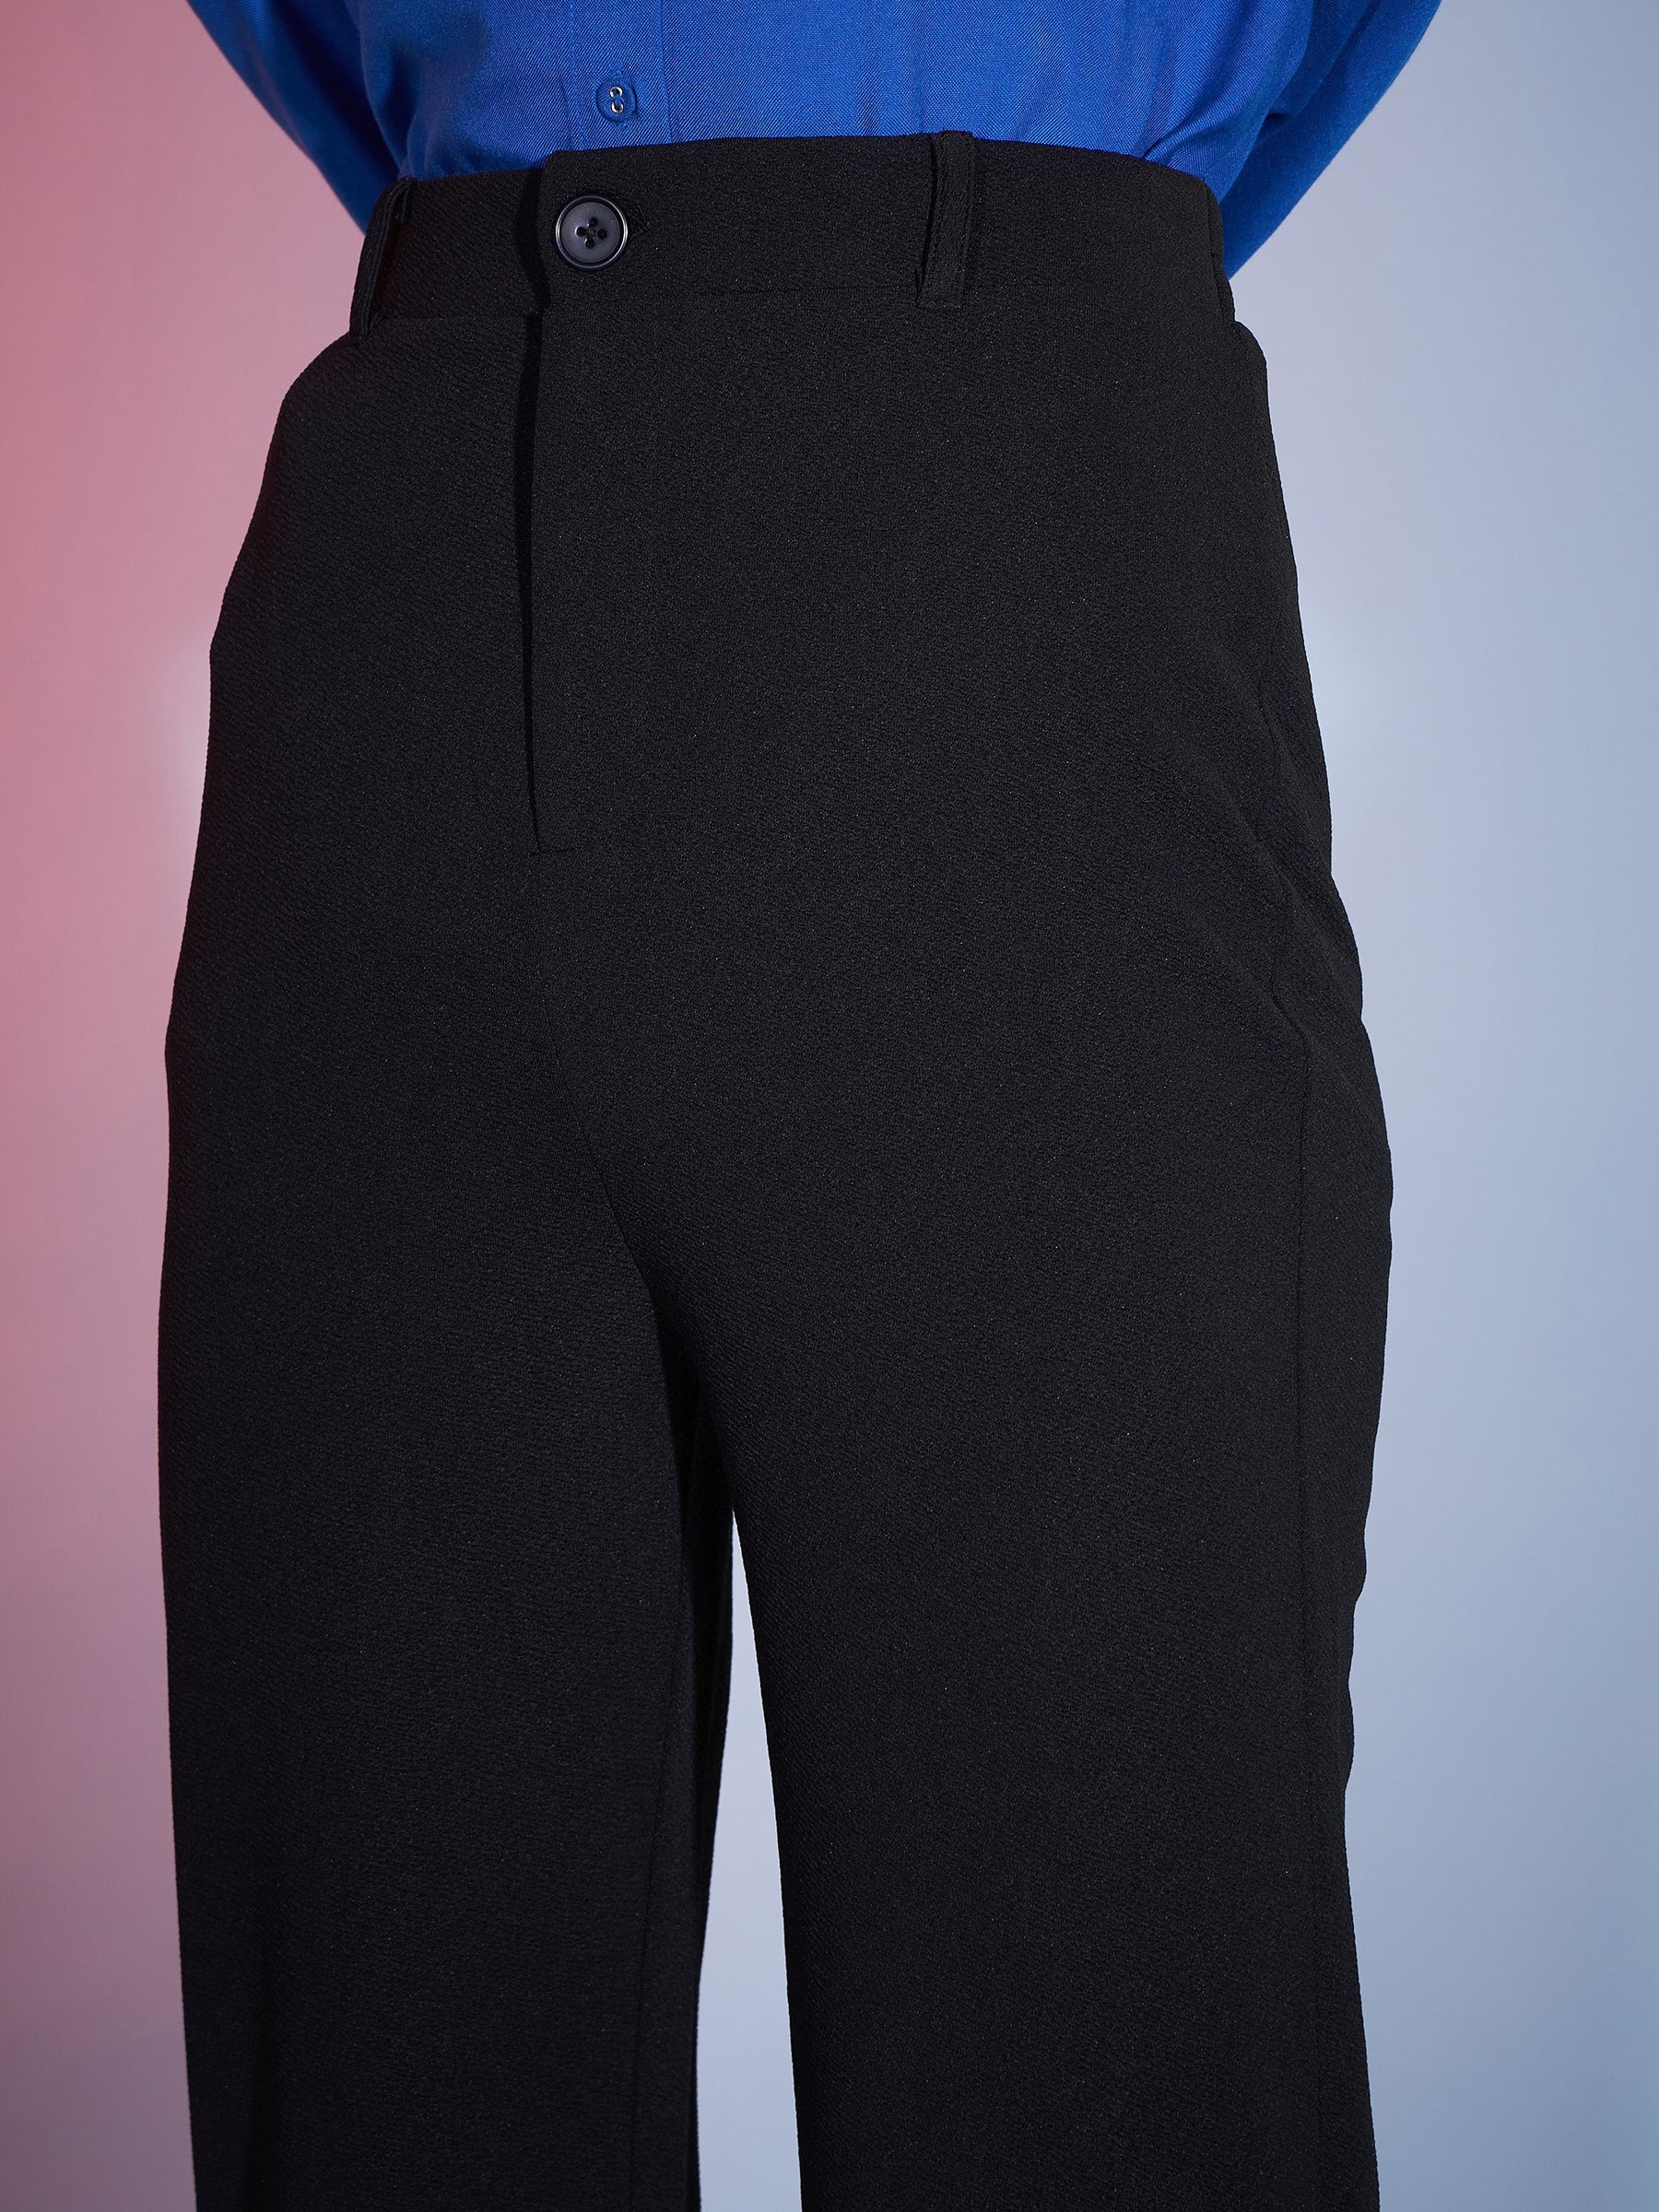 Cotton Black Stretch Pintucks Pants at Rs 679/piece in Delhi